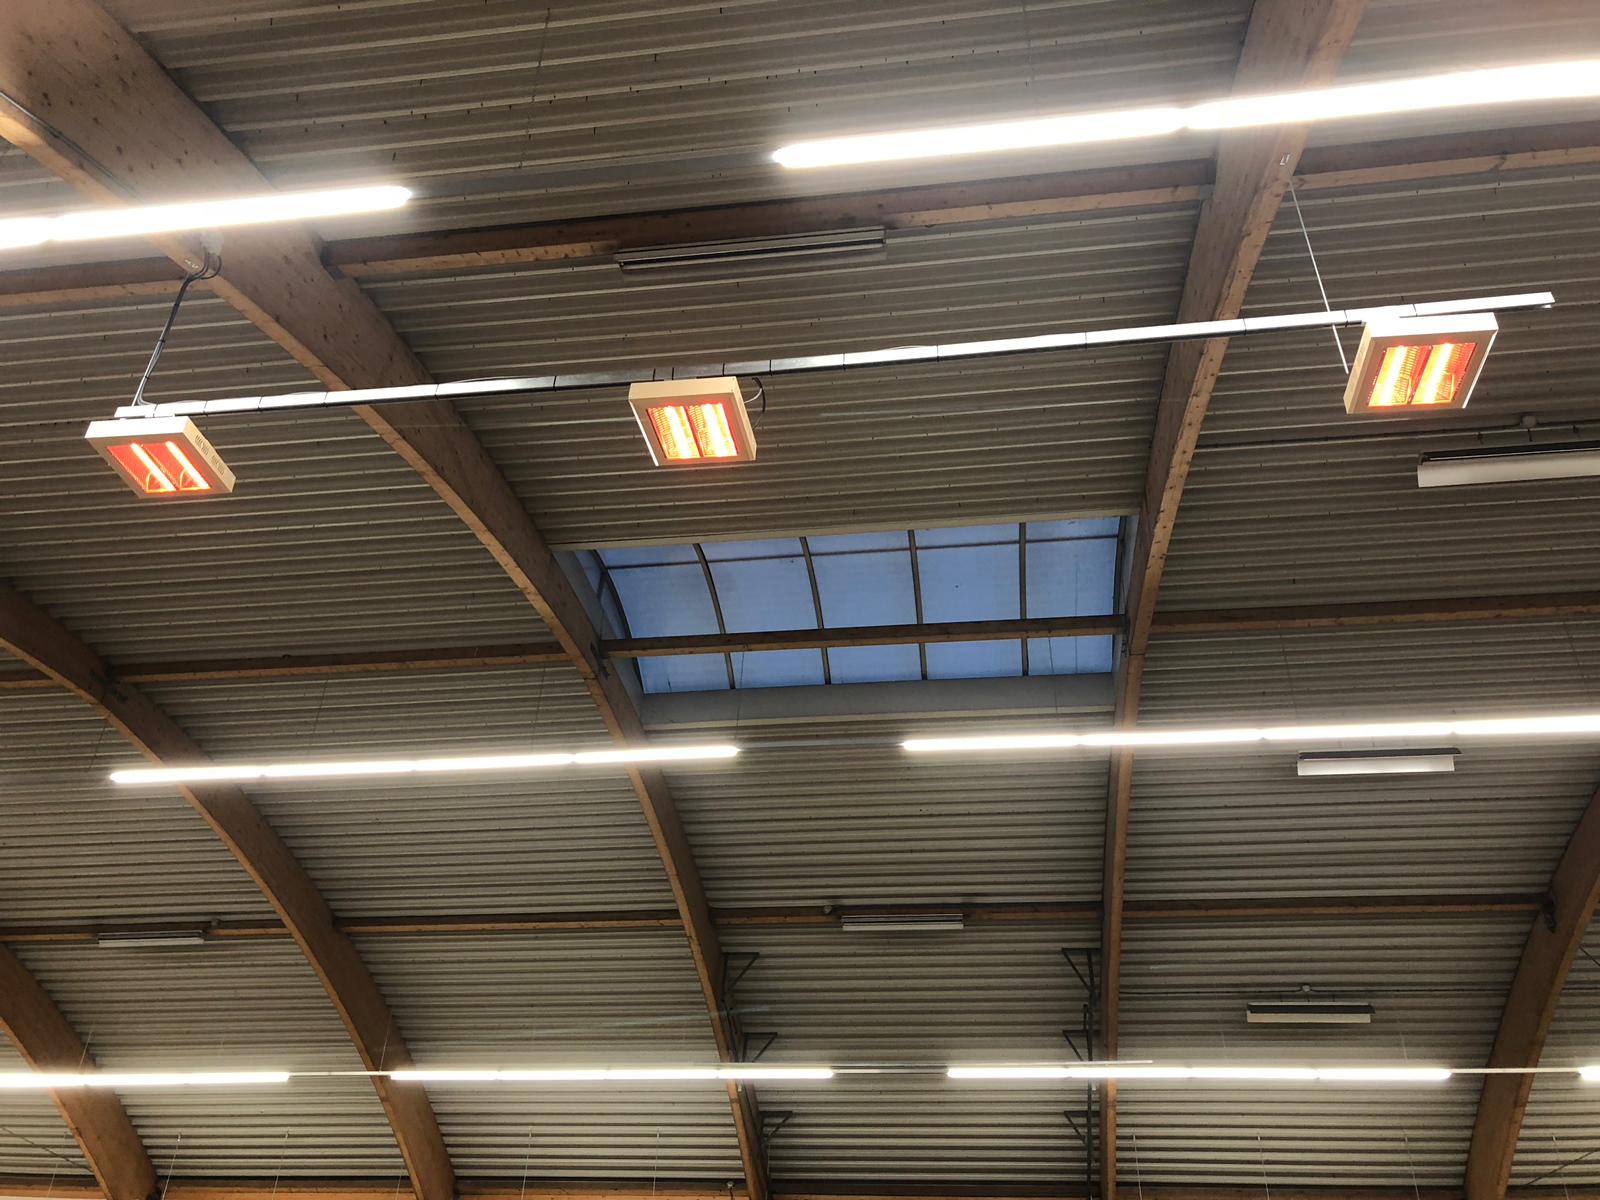 HLQ Heater Ceiling Suspended